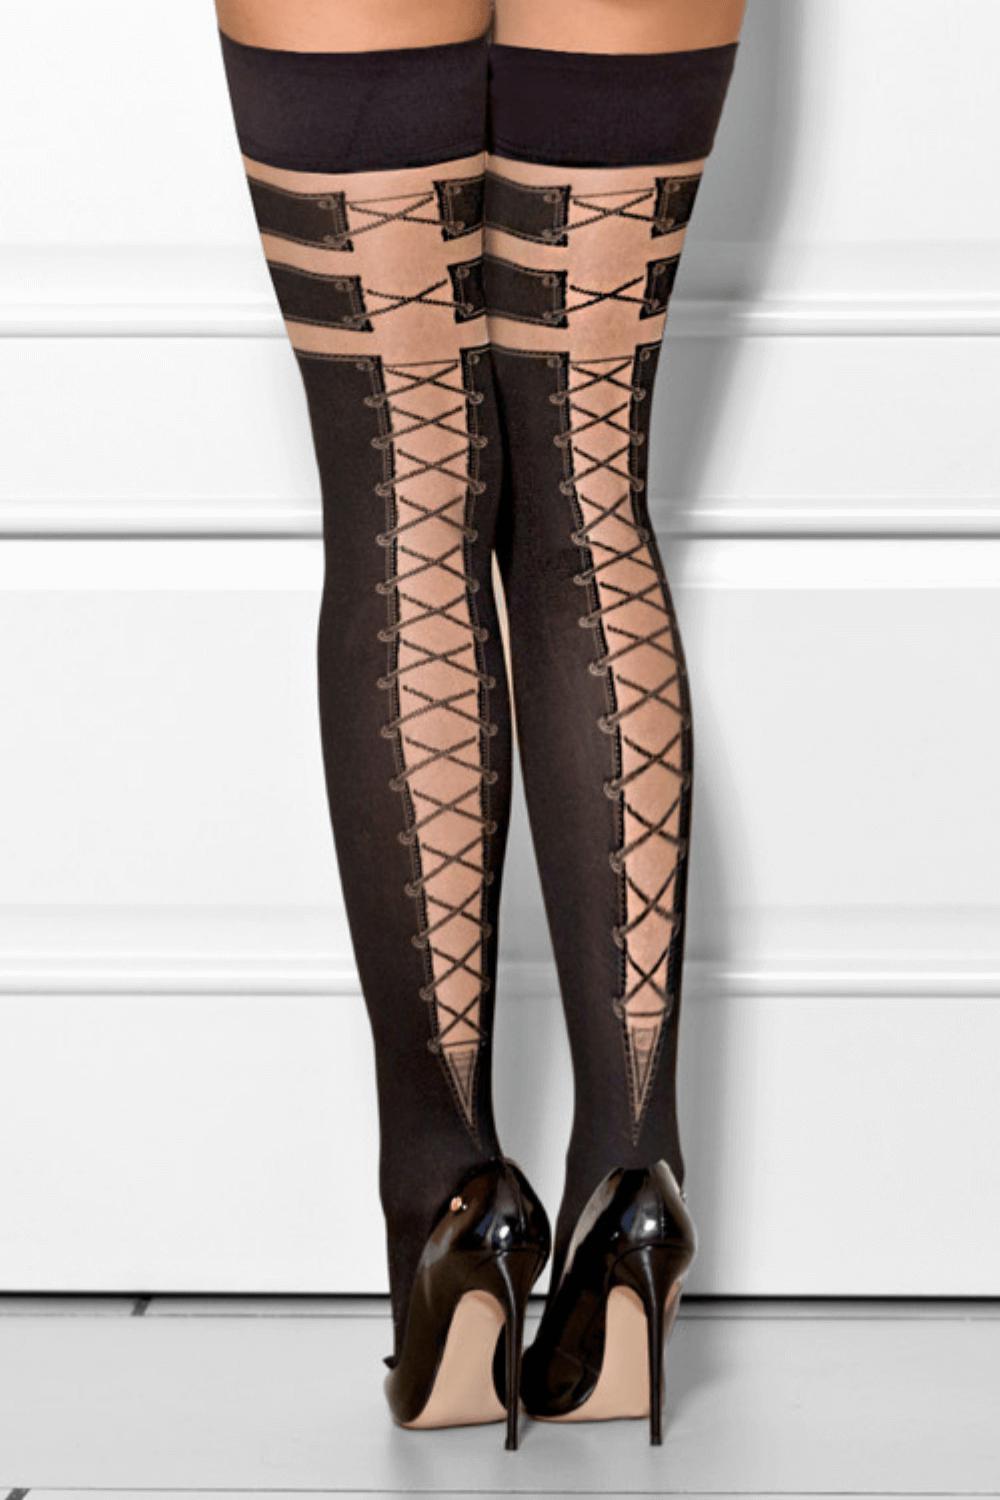 Candy Shop Patterned Stockings Hold Ups-Axami-Rebel Romance